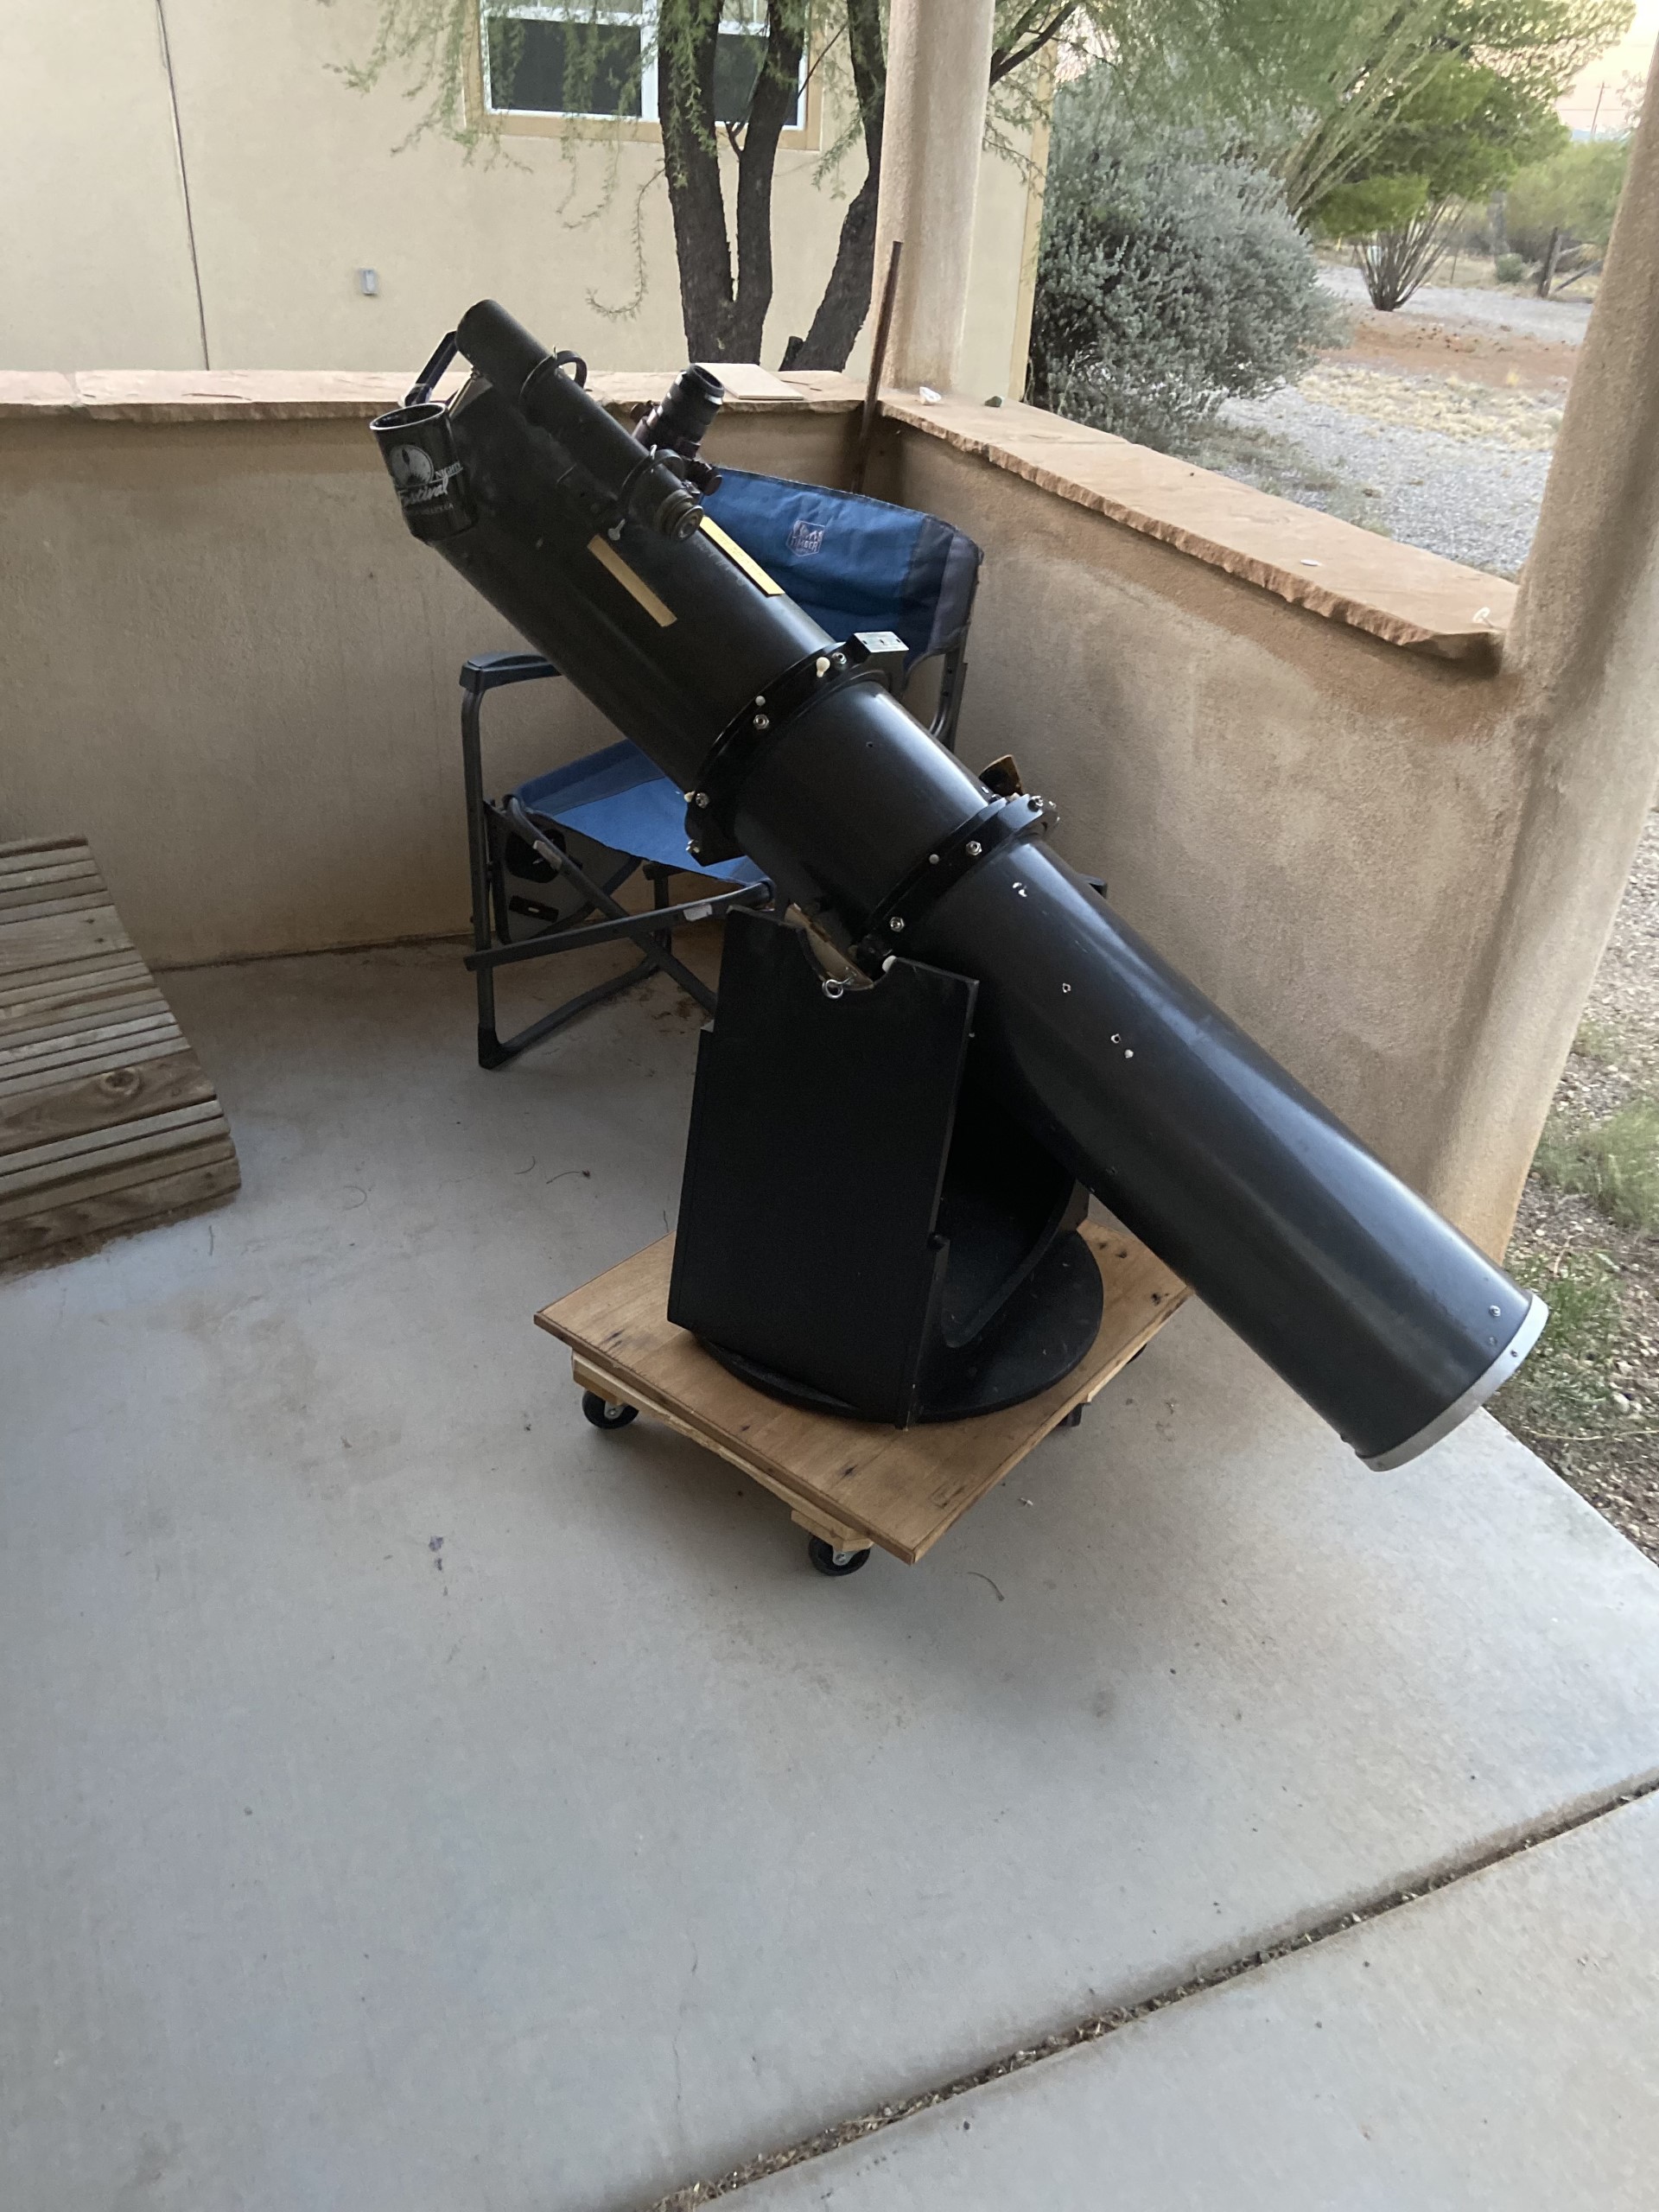 An image of a large Dobsonian style telescope on a back porch.